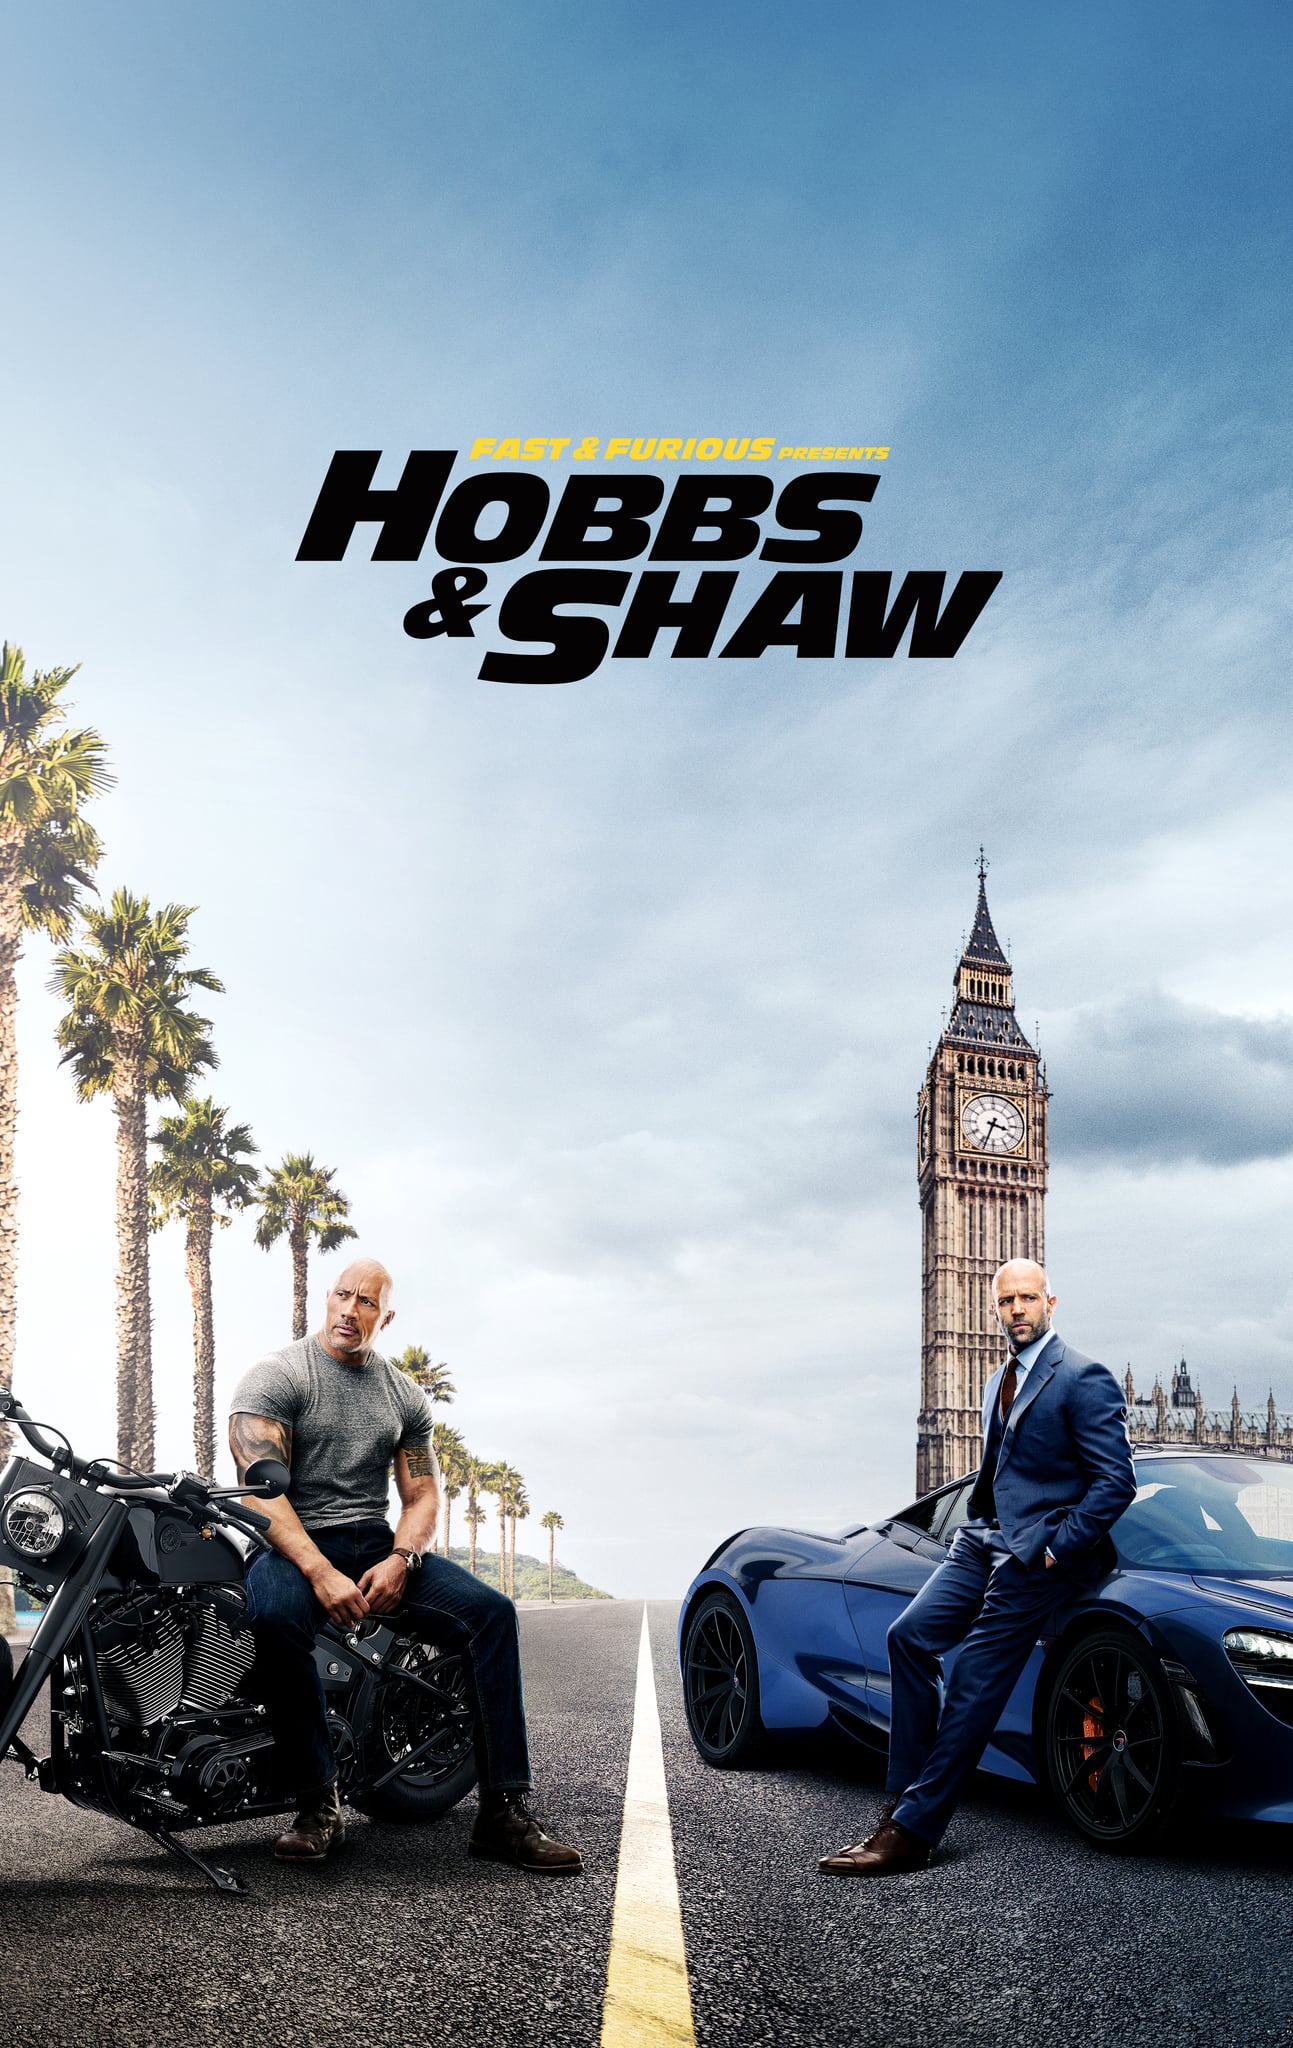 Fast & Furious Presents: Hobbs & Shaw Picture